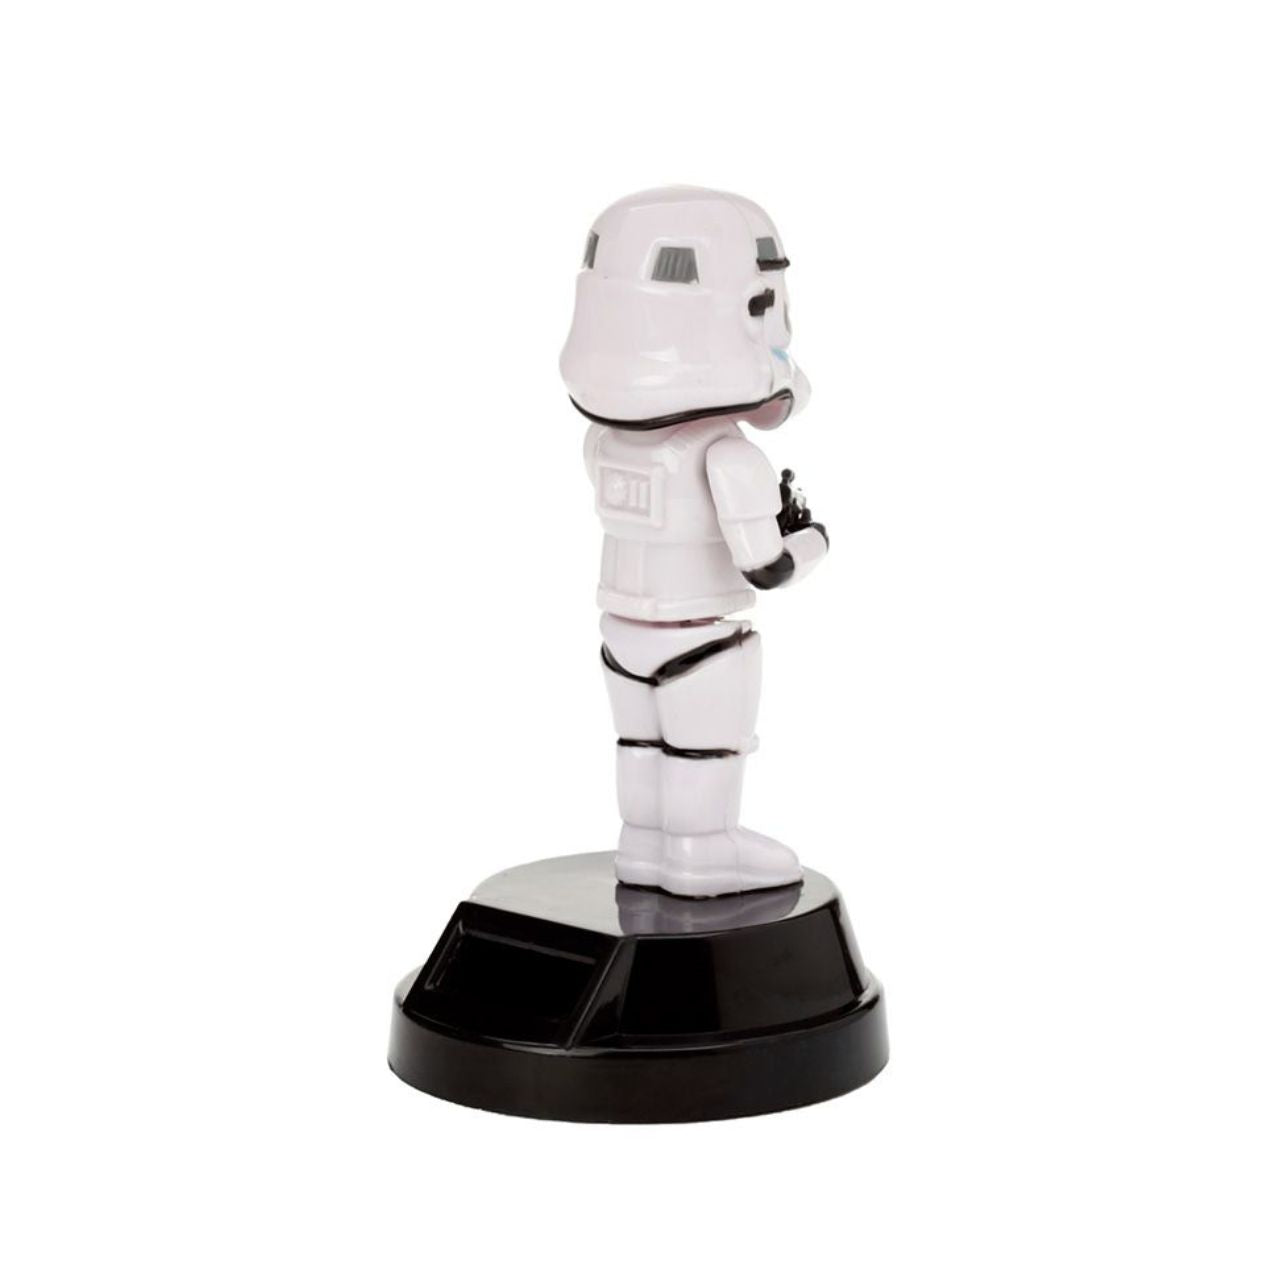 The Original Stormtrooper Solar Pal  The Original Stormtrooper Solar Pal is a revolutionary new product from the renowned Star Wars franchise. It harnesses the power of the sun to create a captivating light show for outdoor spaces.